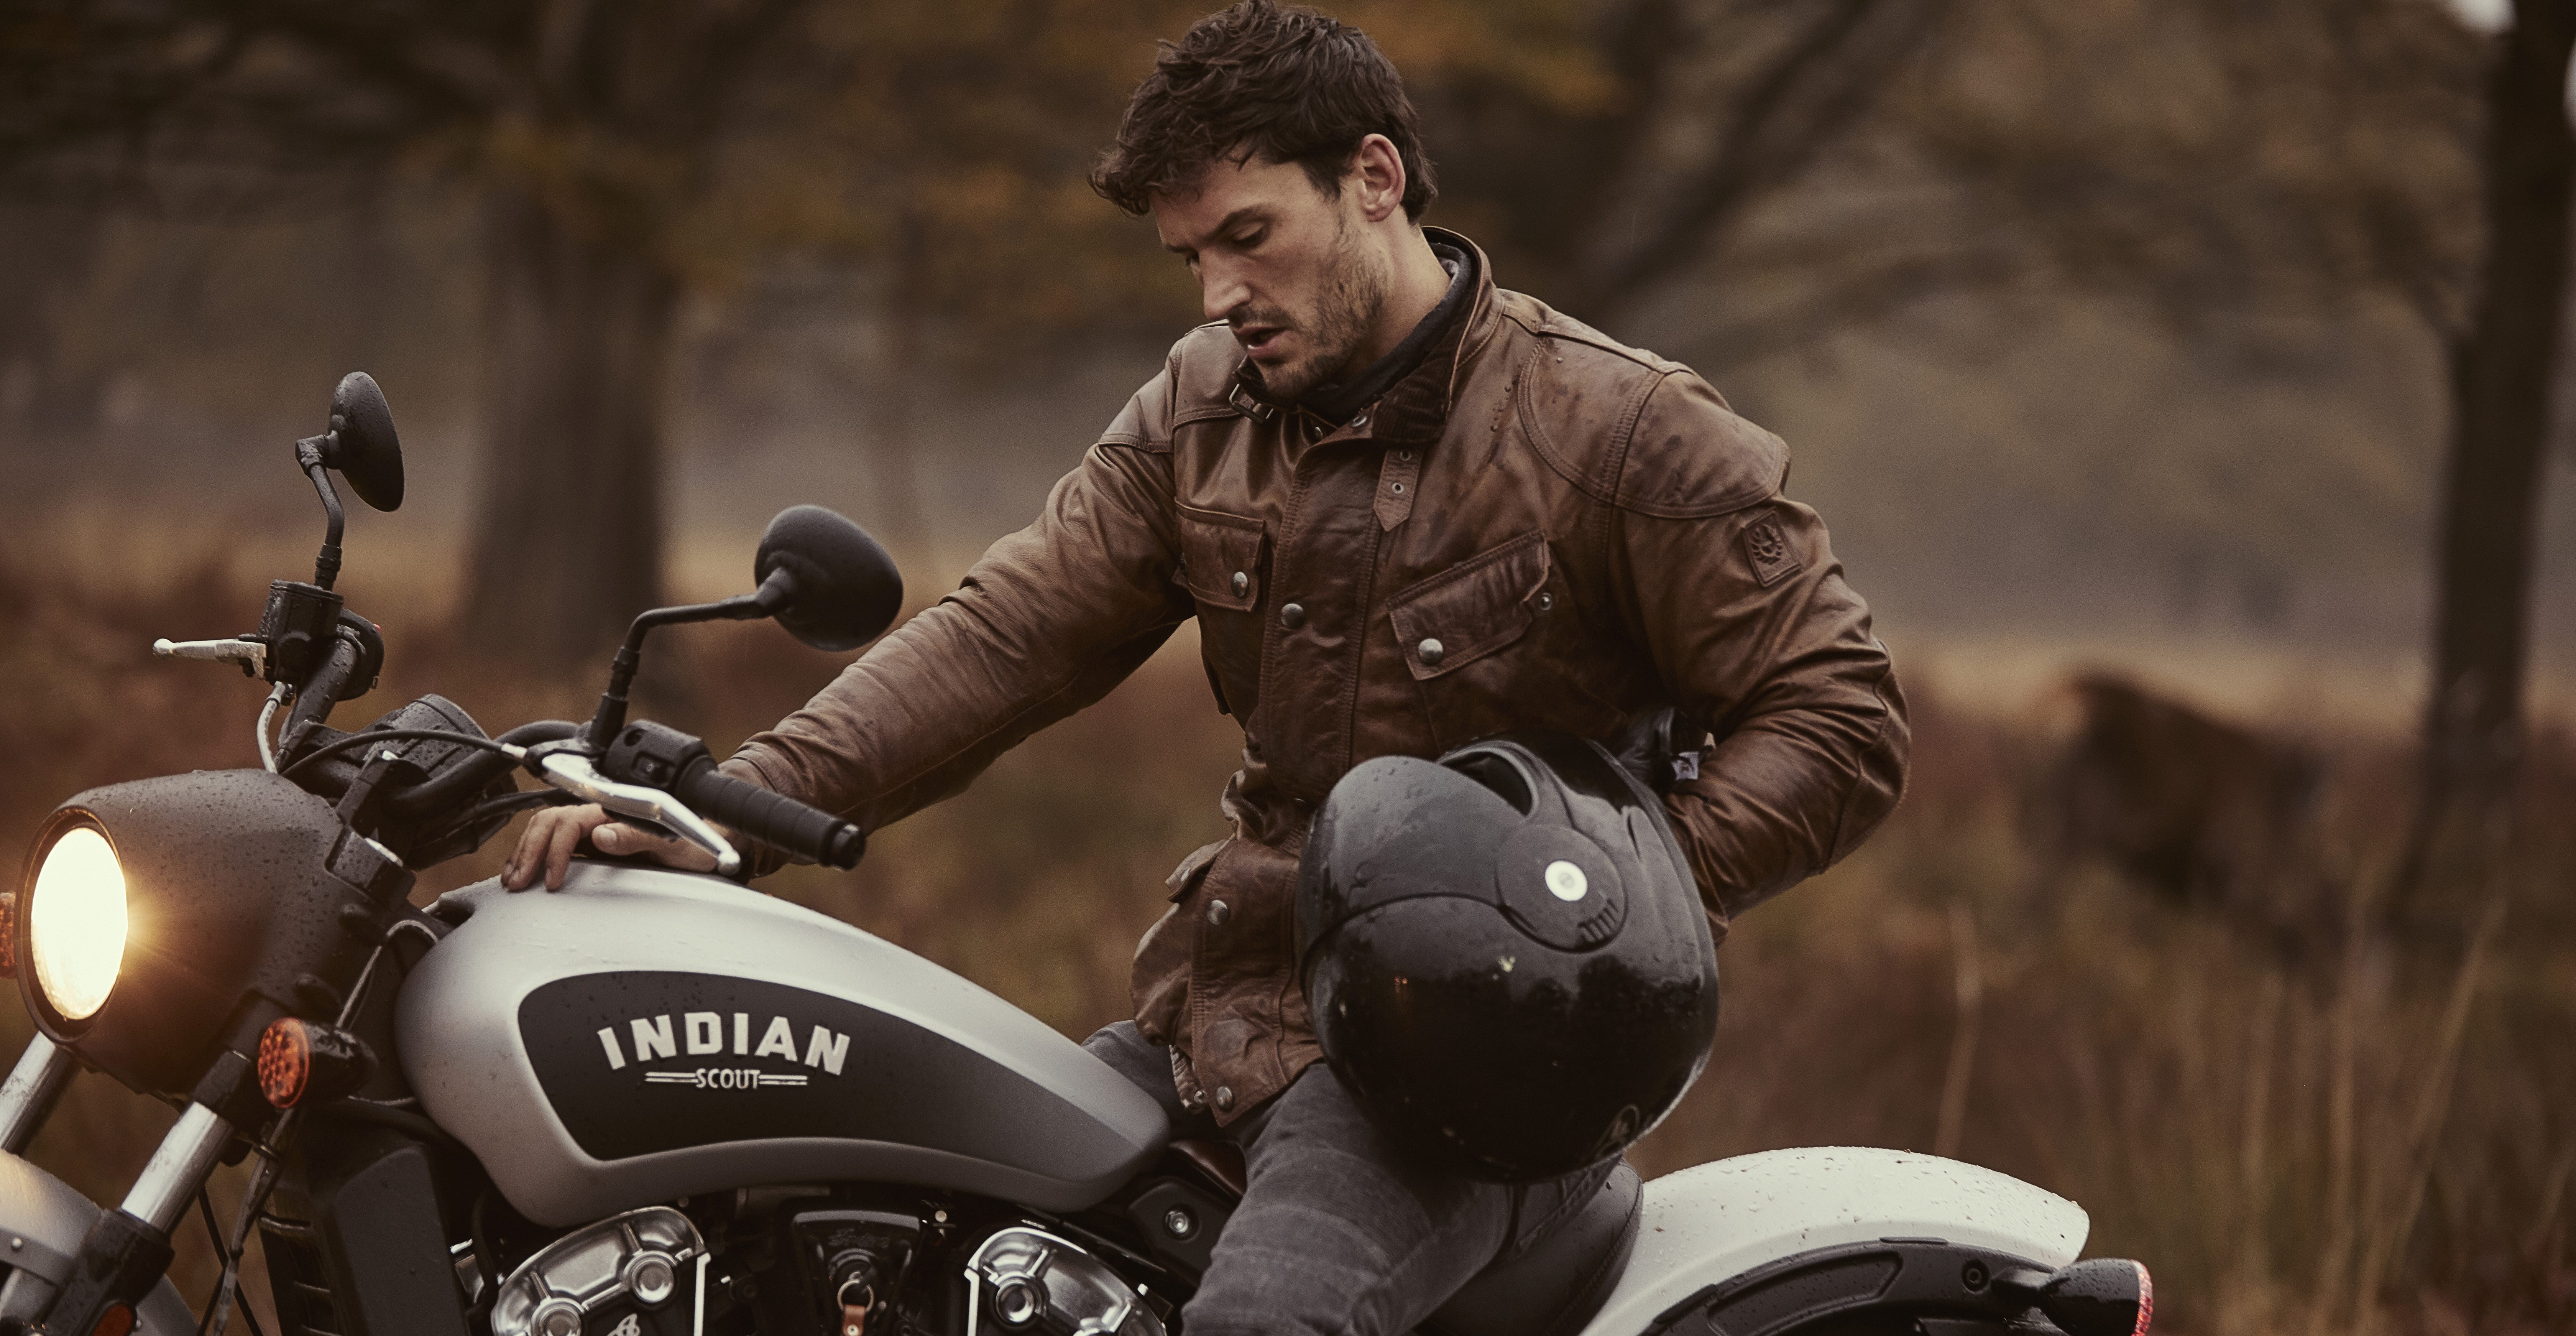 Motorcycling style & fashion: A gentleman's guide, Gentleman's Journal